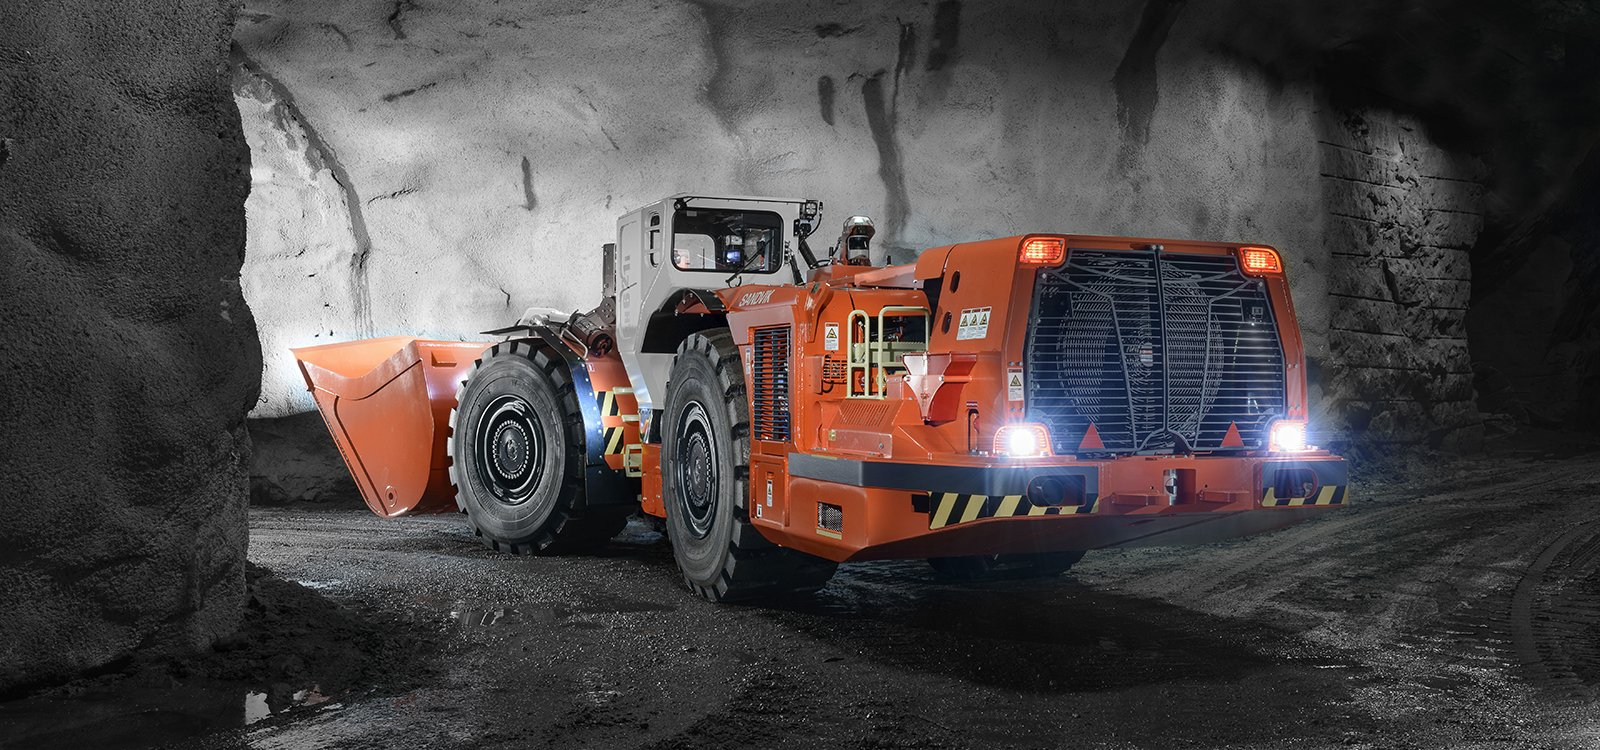 Sandvik LH621i is designed to quickly clear headings, ensuring rapid development.